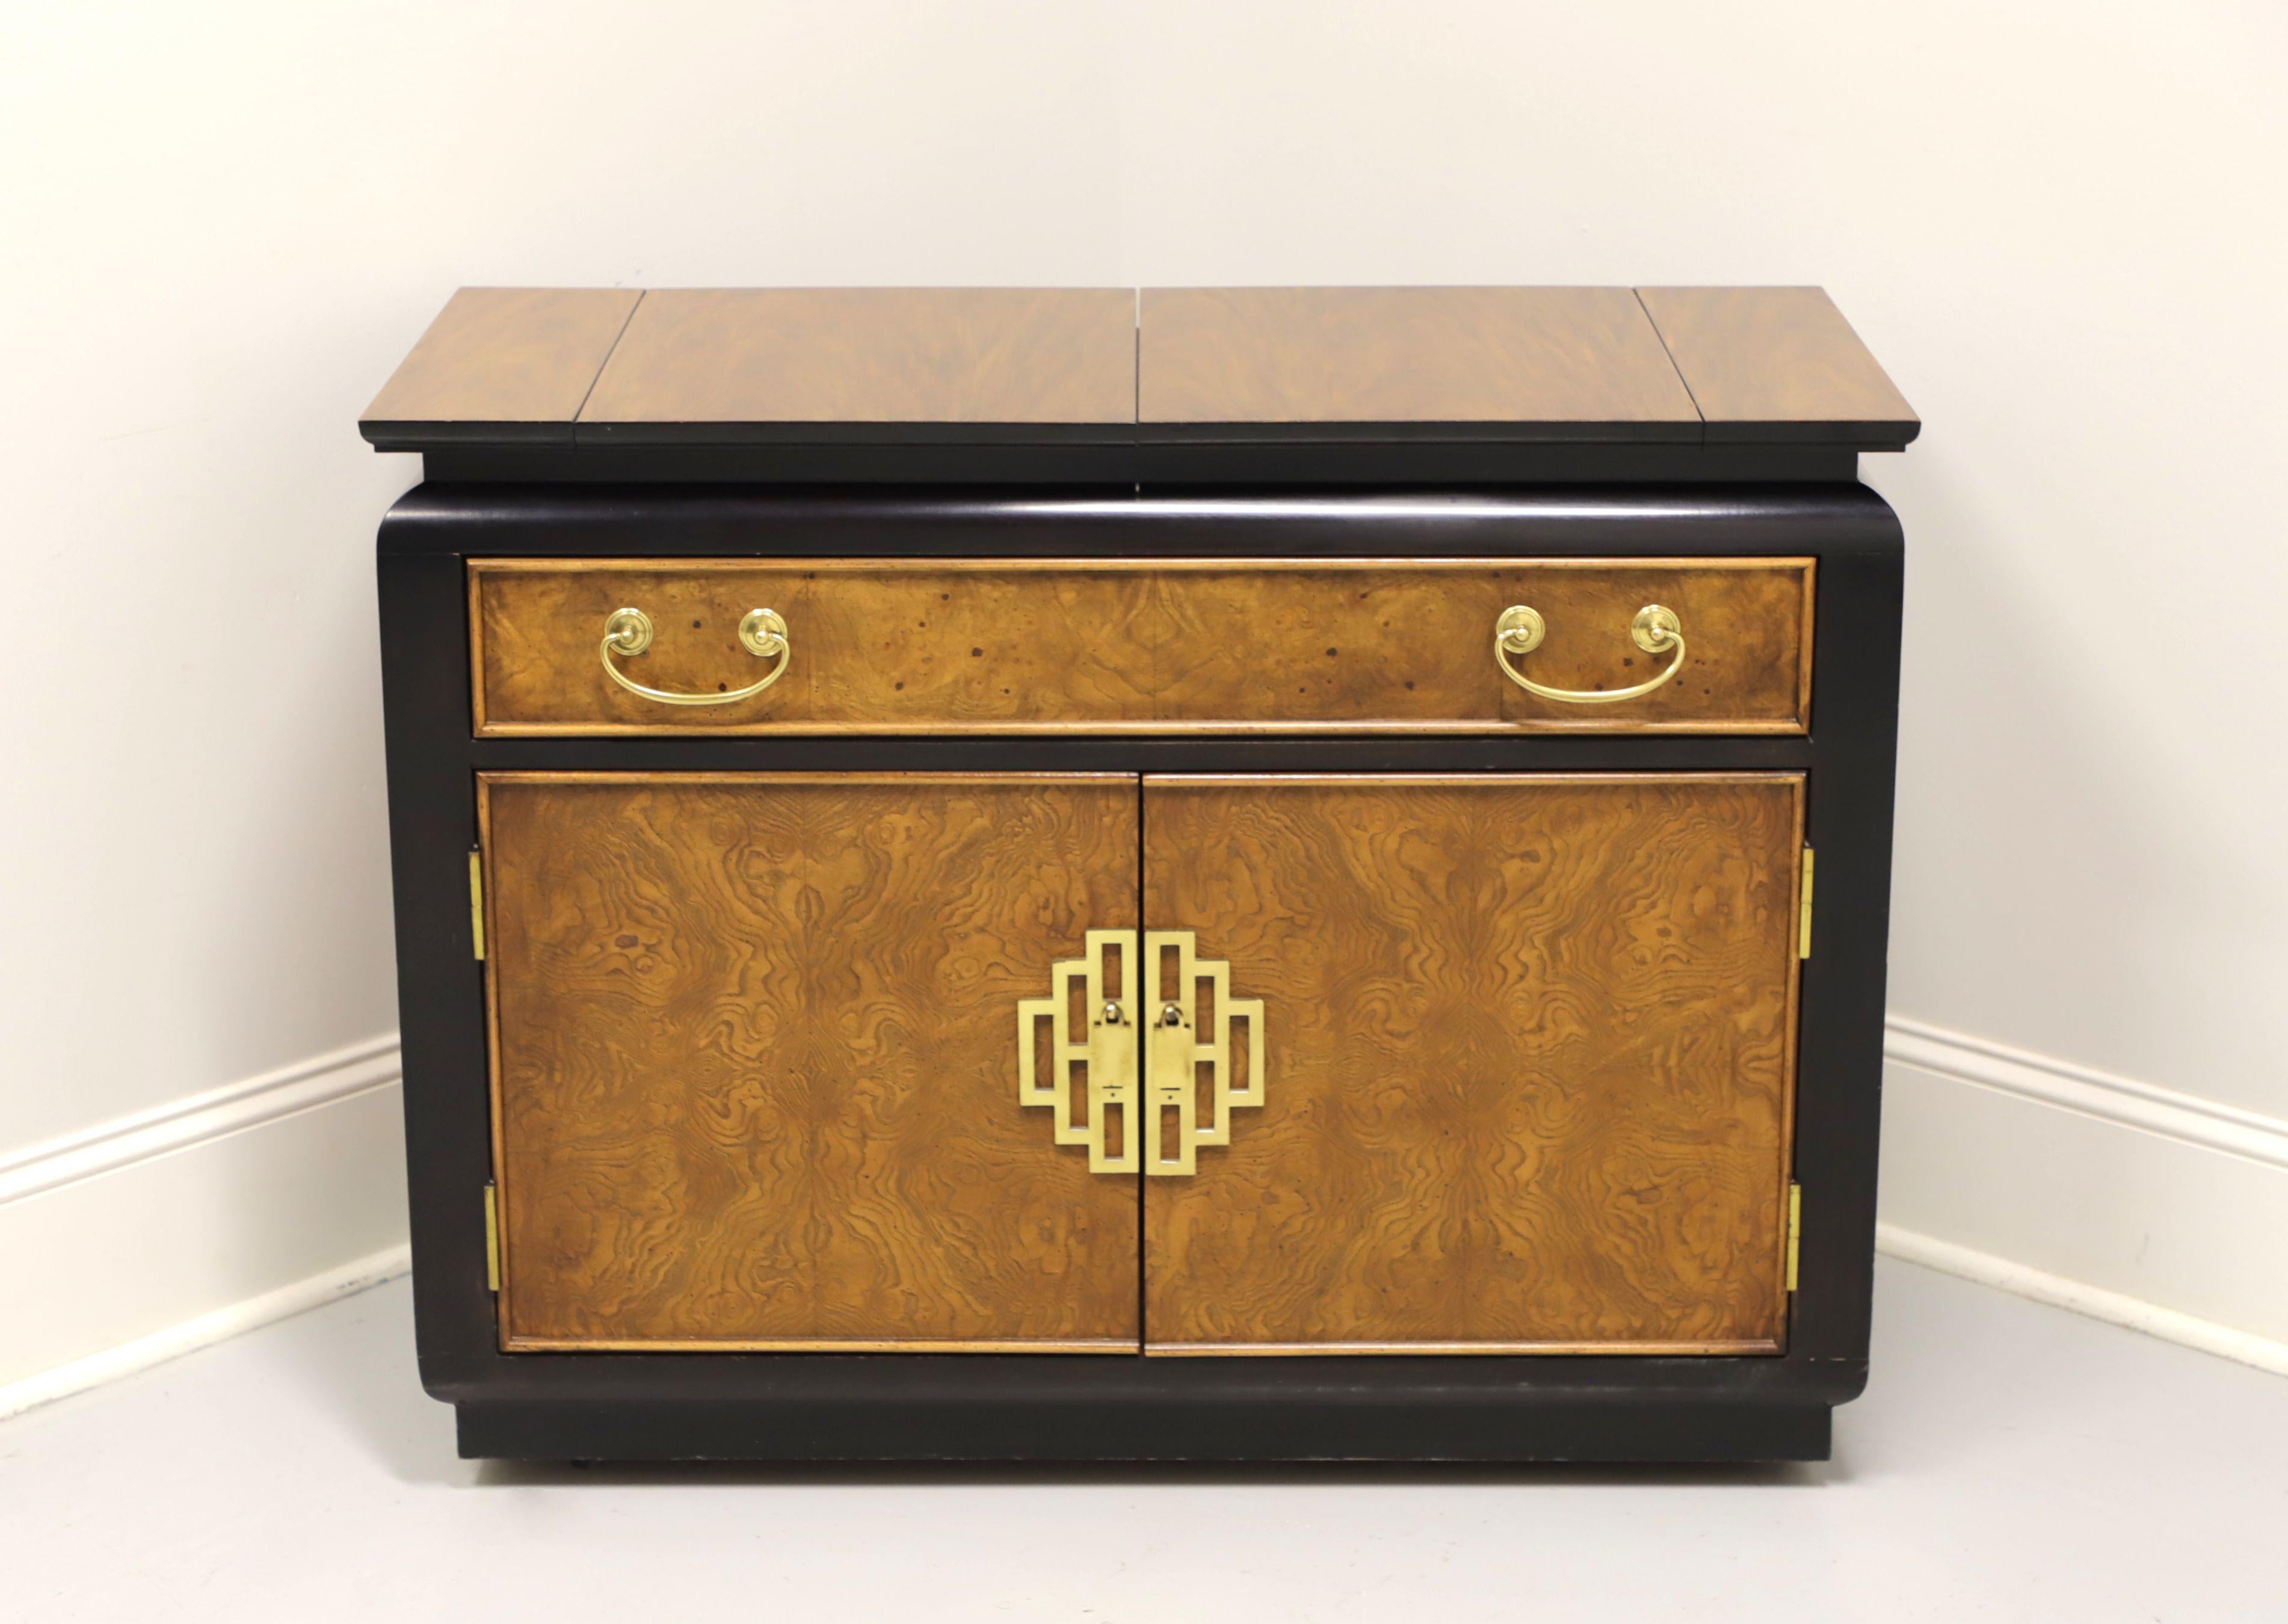 An Asian style server by high-quality furniture maker Century, from their 